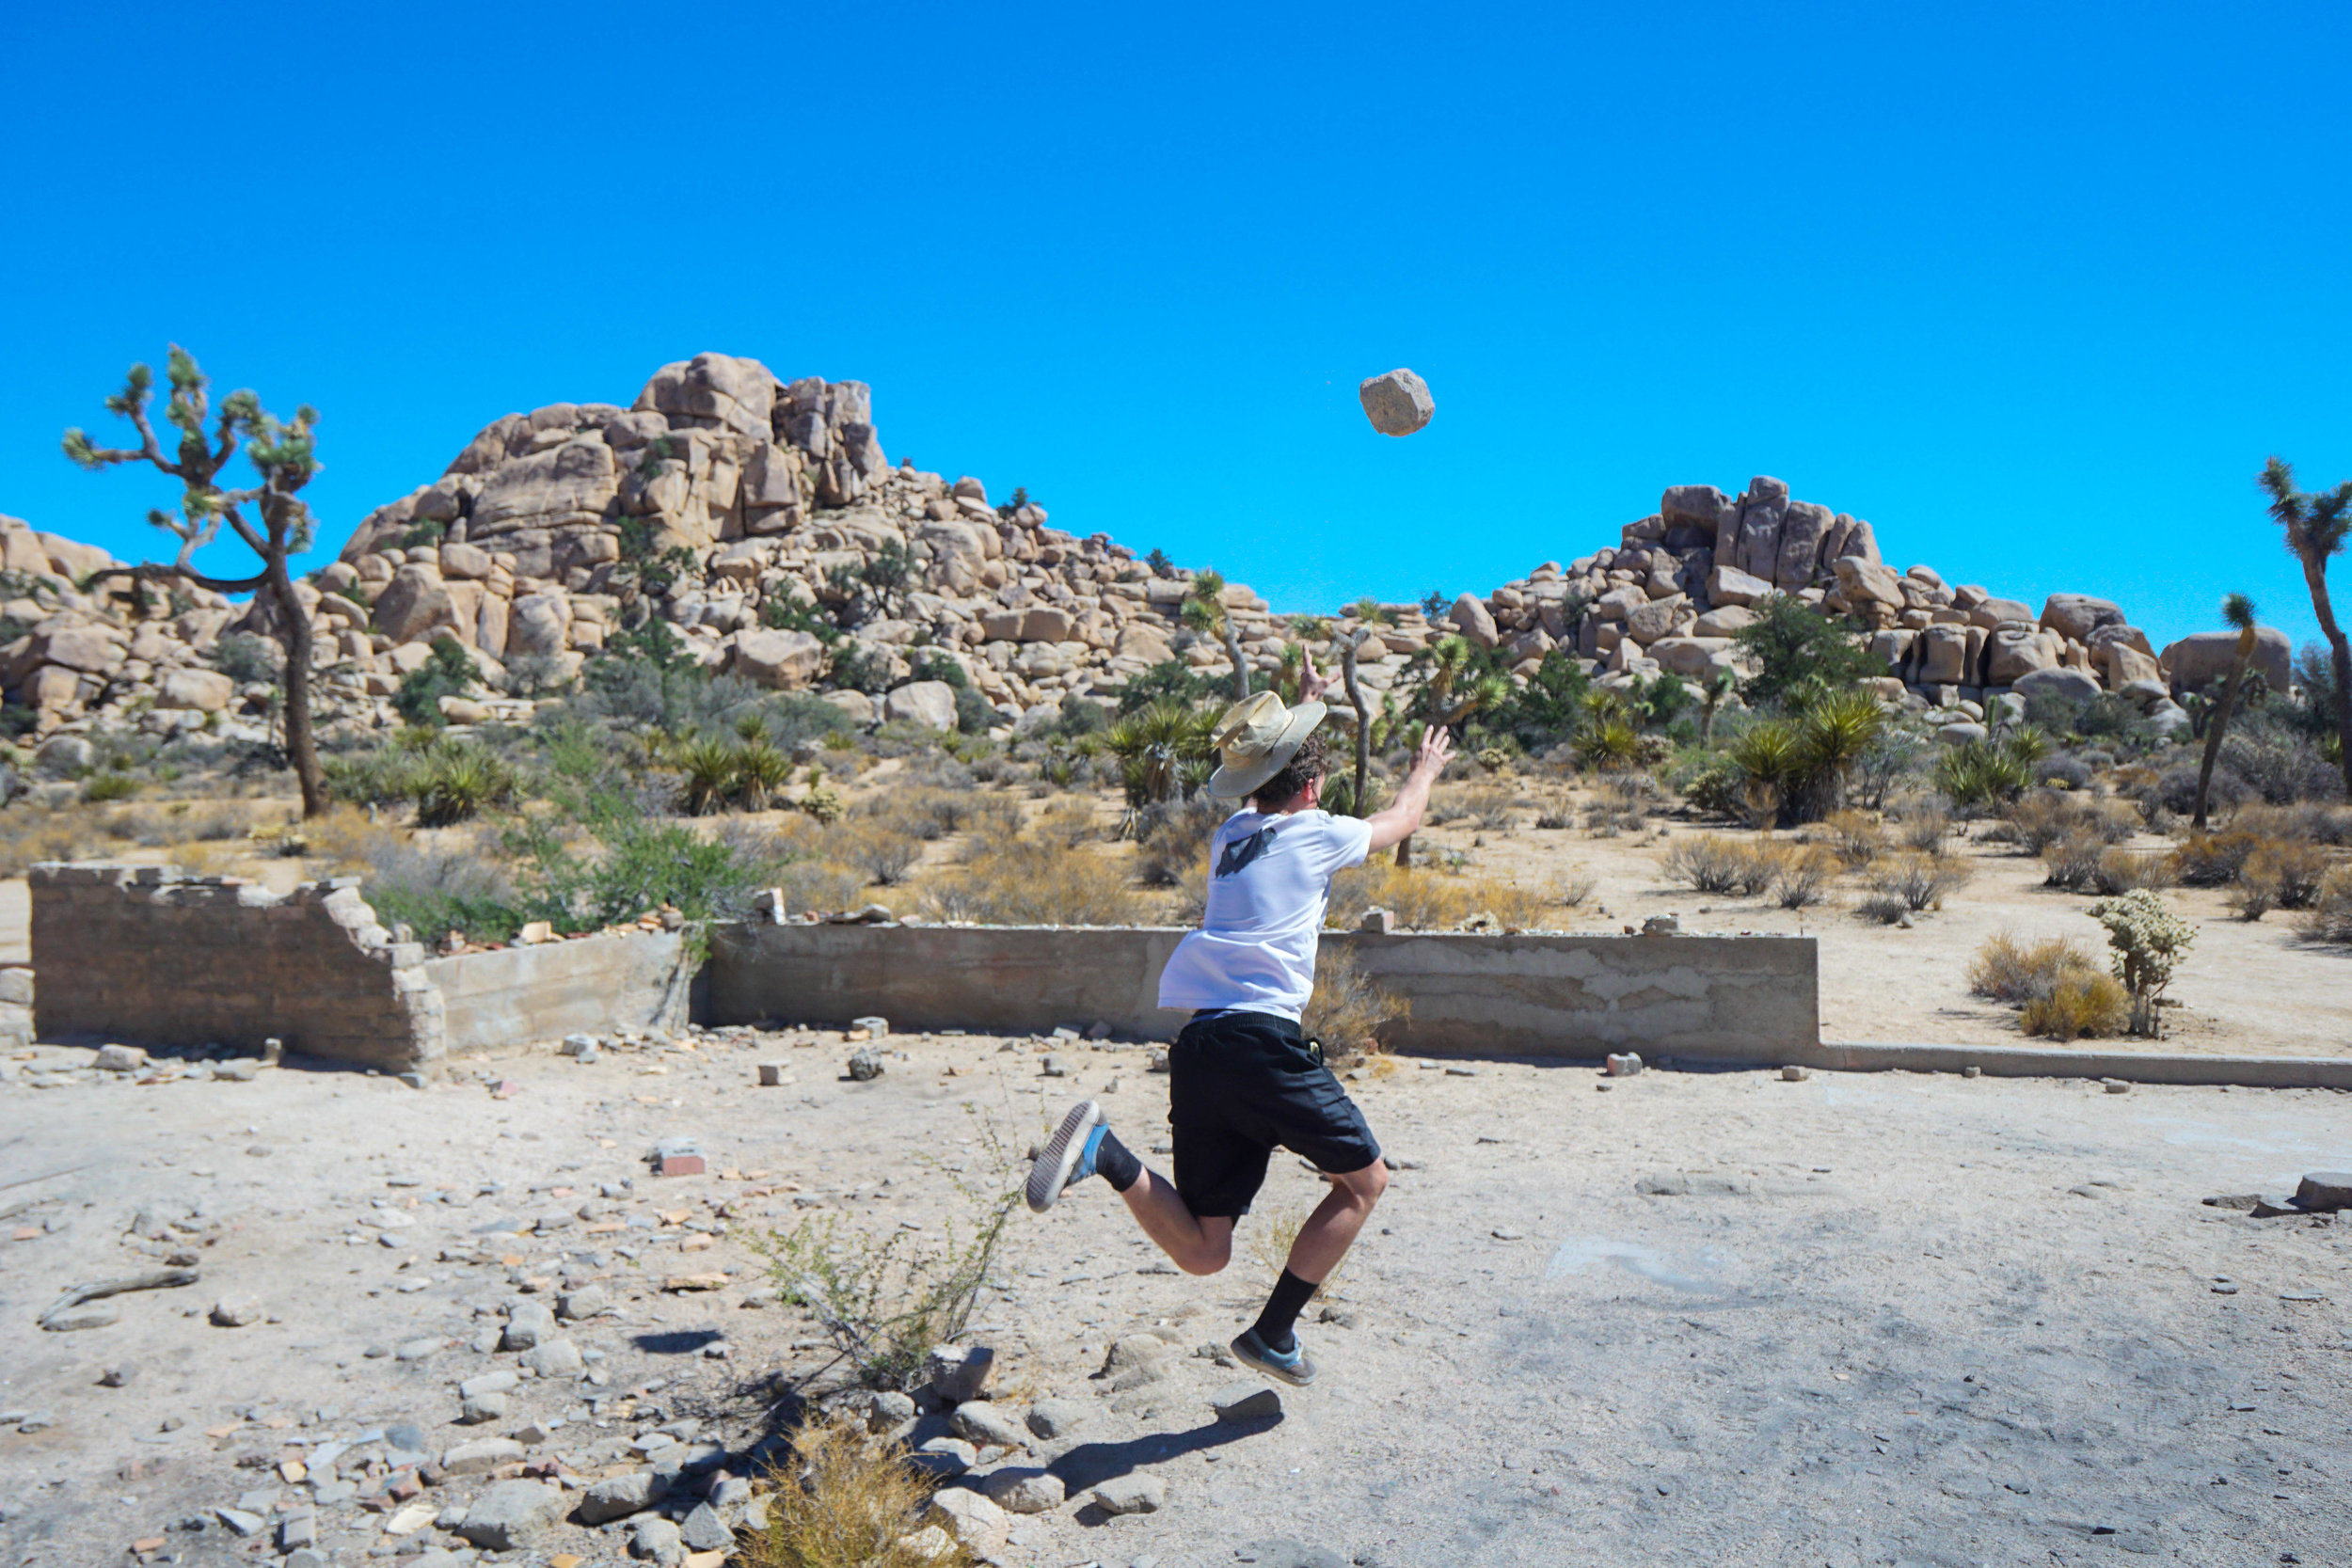 Ah, the age old game of 'Rock Toss'; the national sport of the Mojave Desert